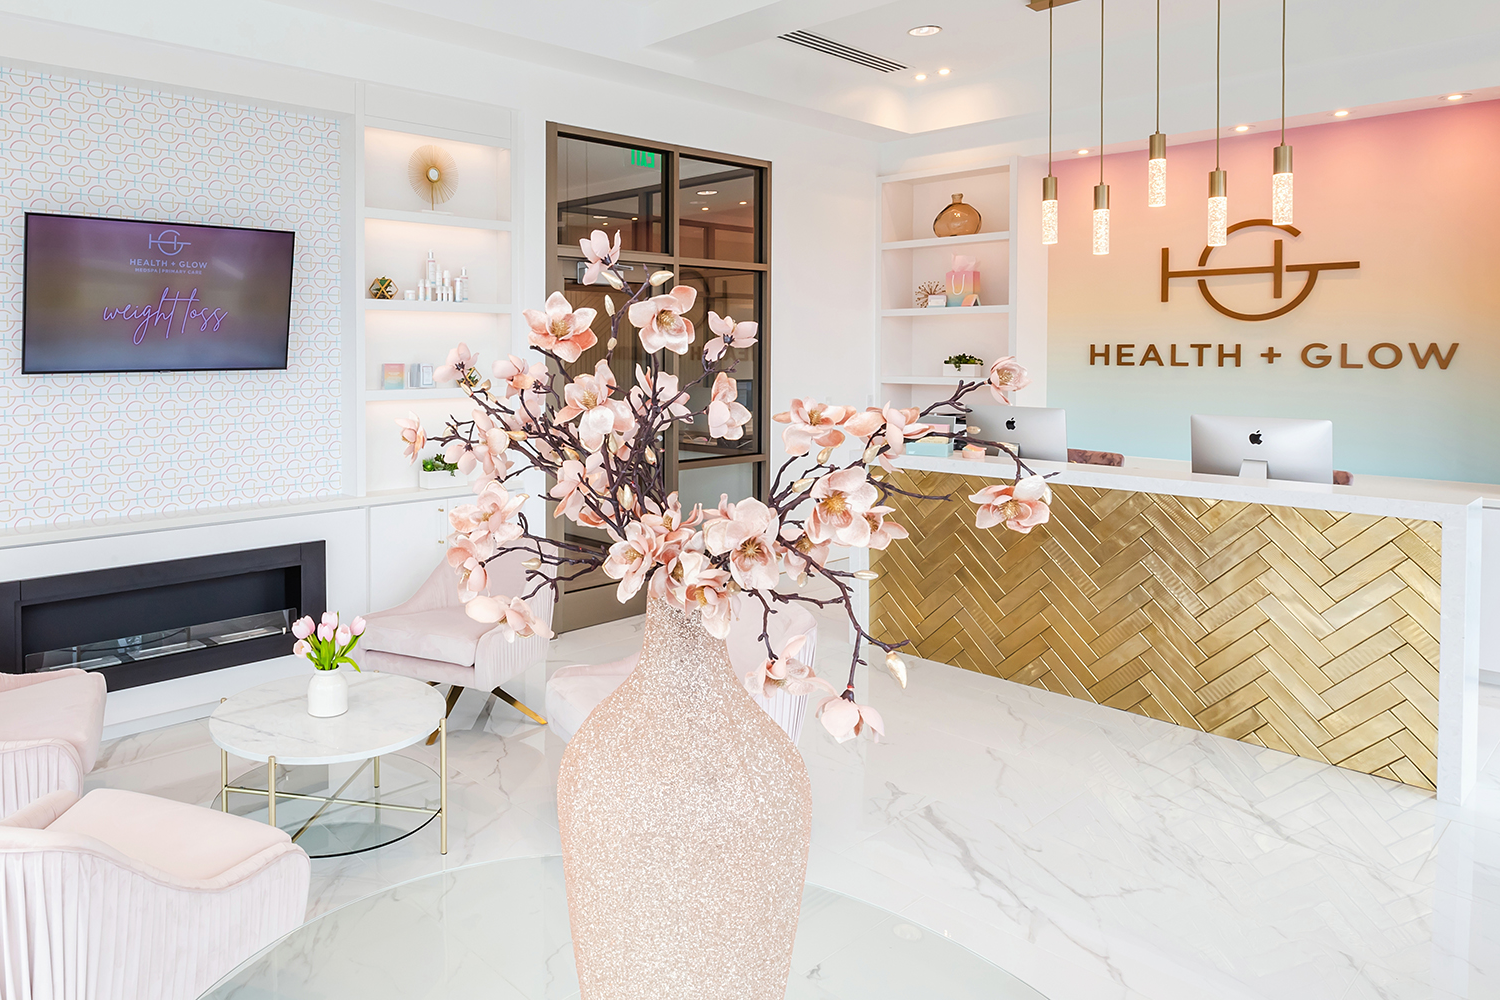 Tampa Magazine 2021 - Glow on at Health + Glow, Tampa’s First Primary Care + Medical Spa